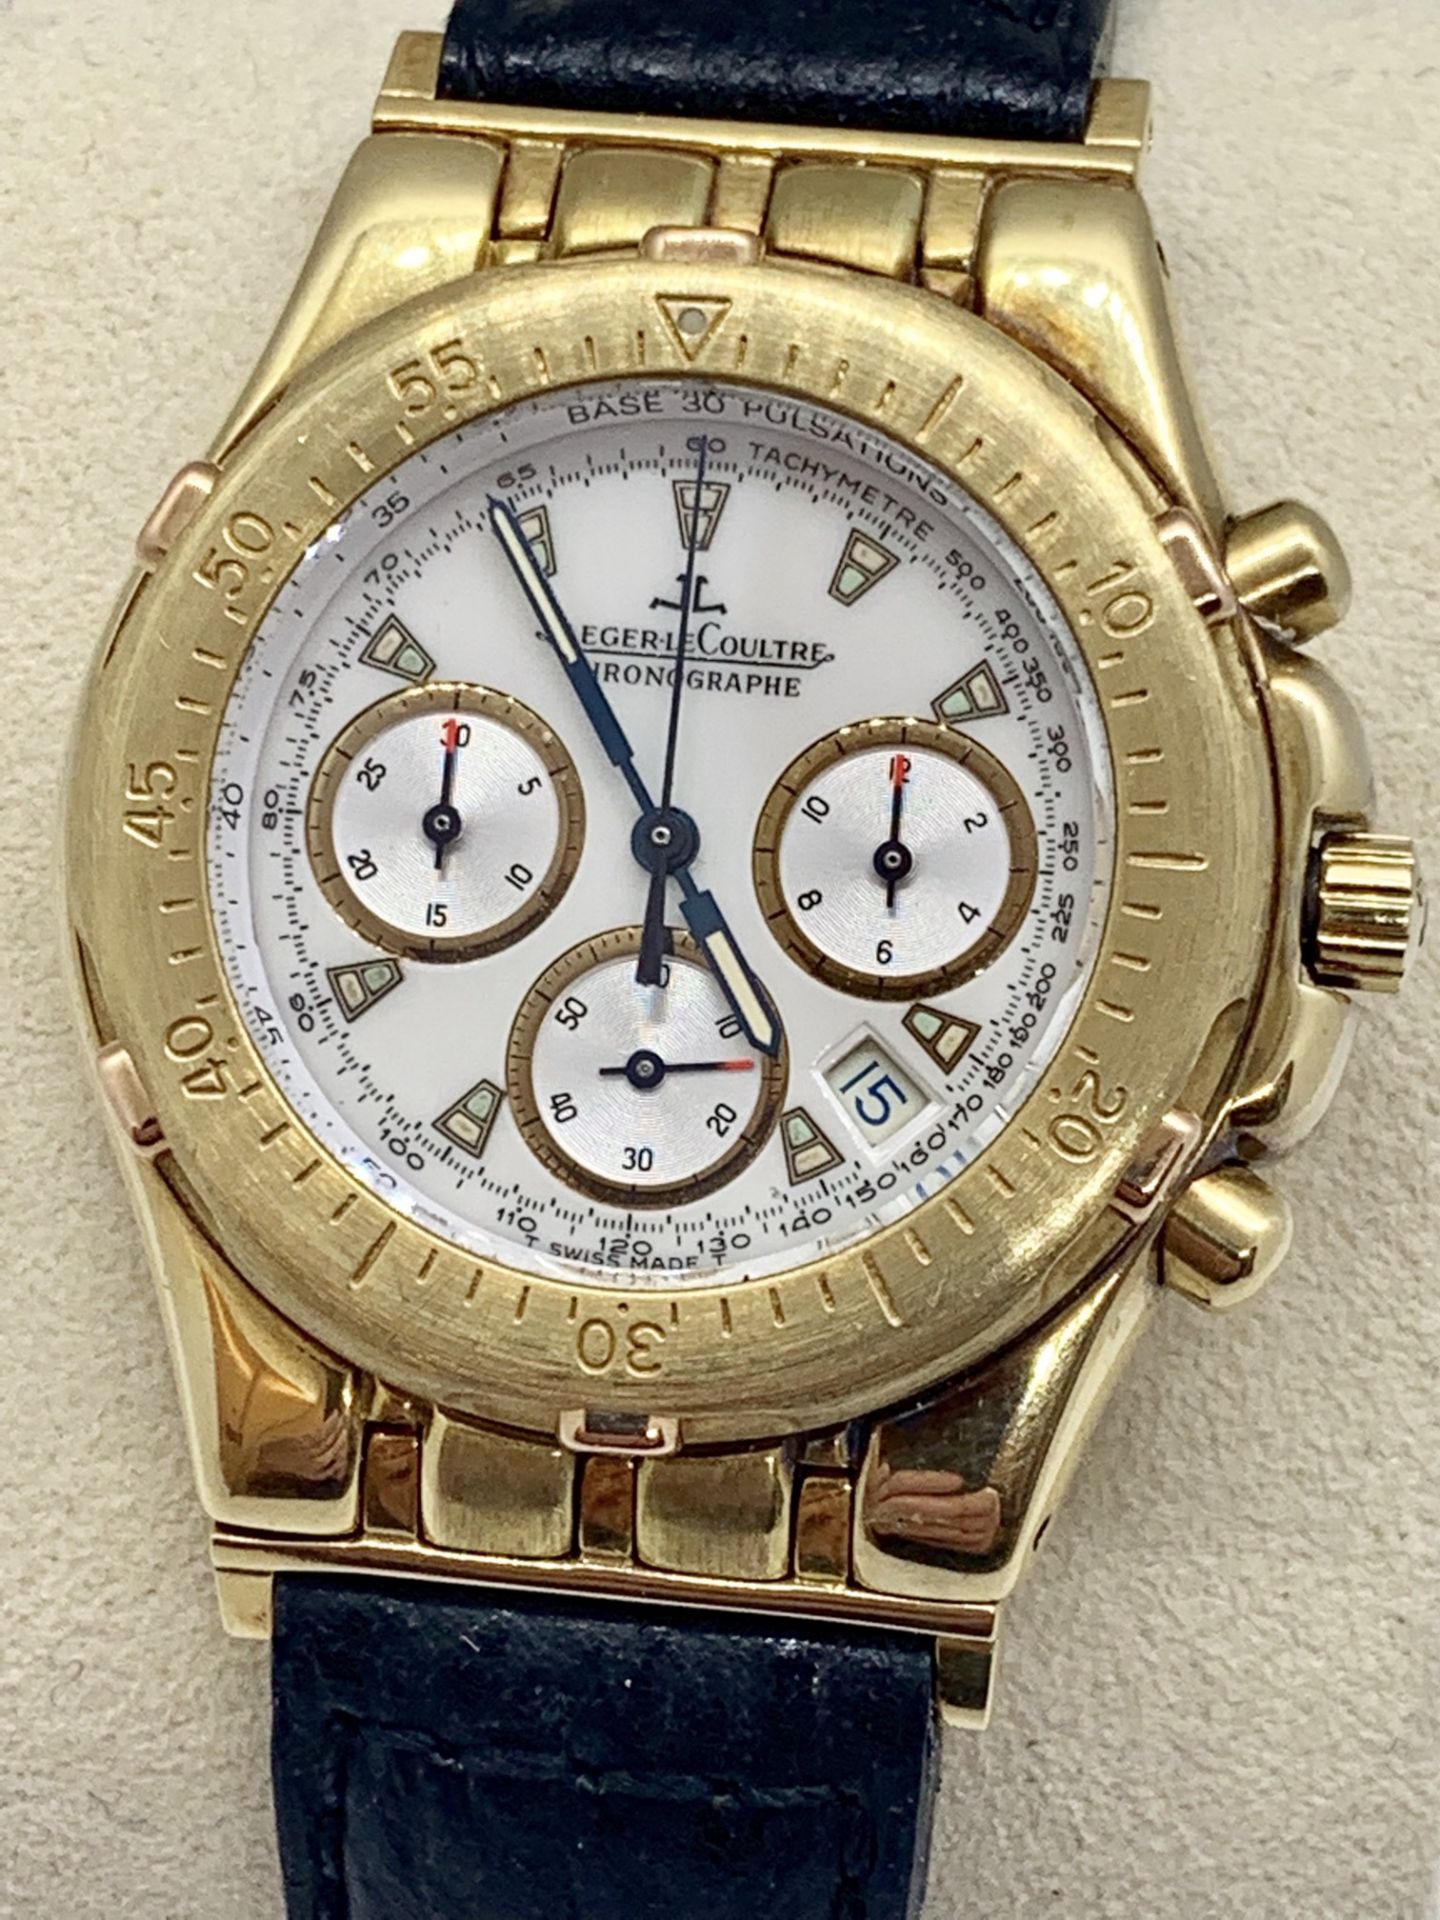 JAEGER LECOULTRE CHRONOGRAPH YELLOW GOLD WATCH